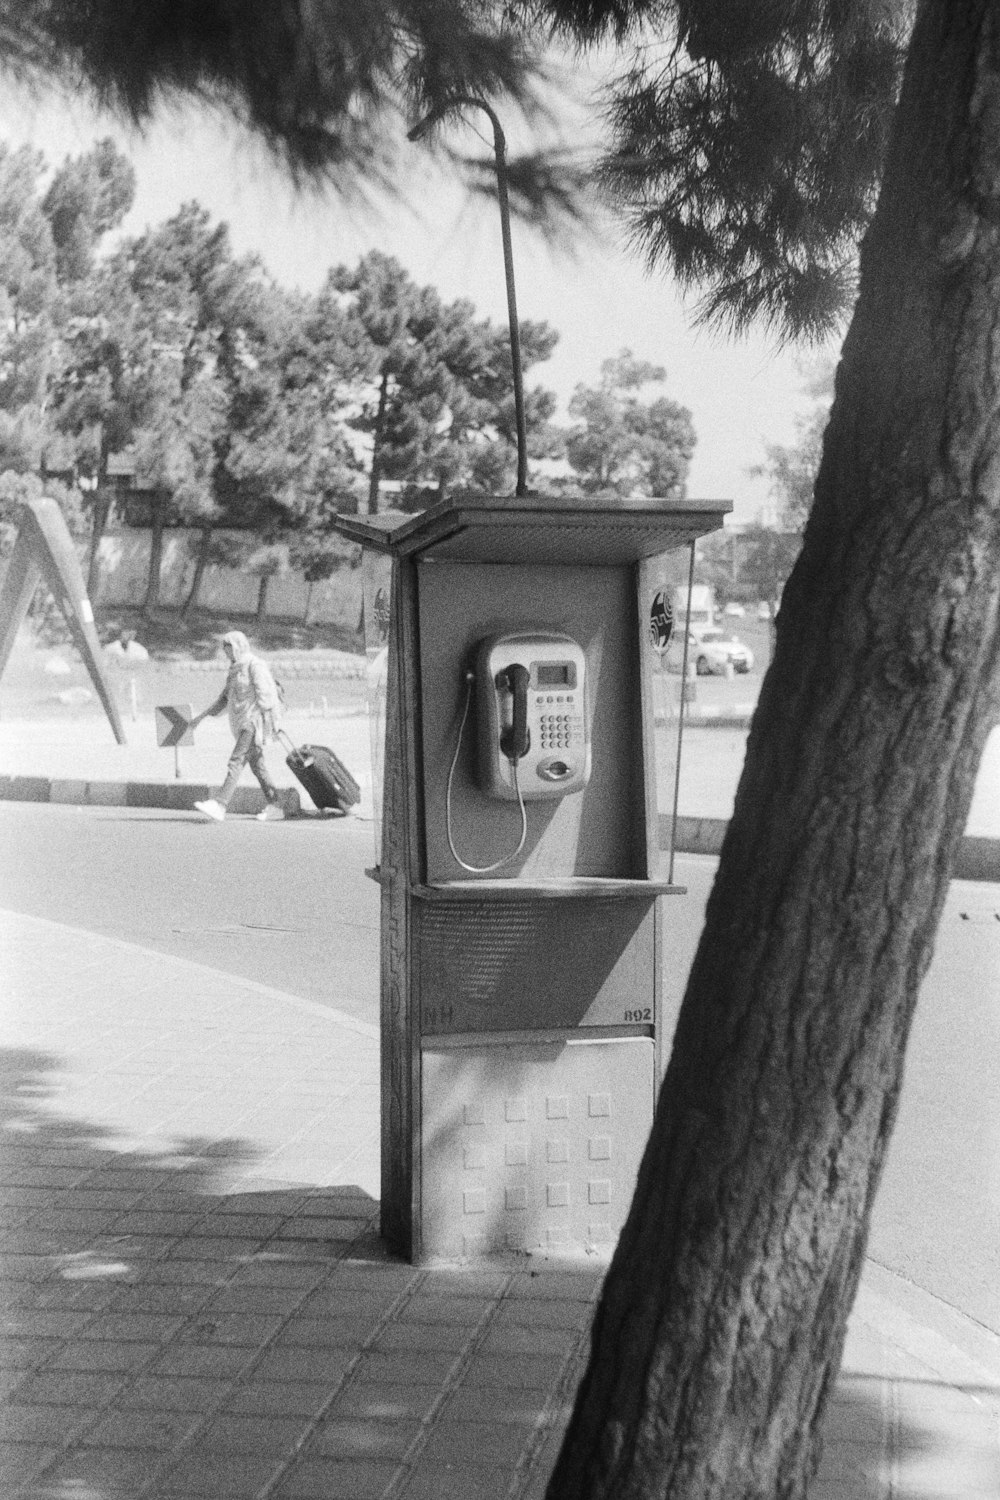 a phone booth sitting next to a tree on a sidewalk